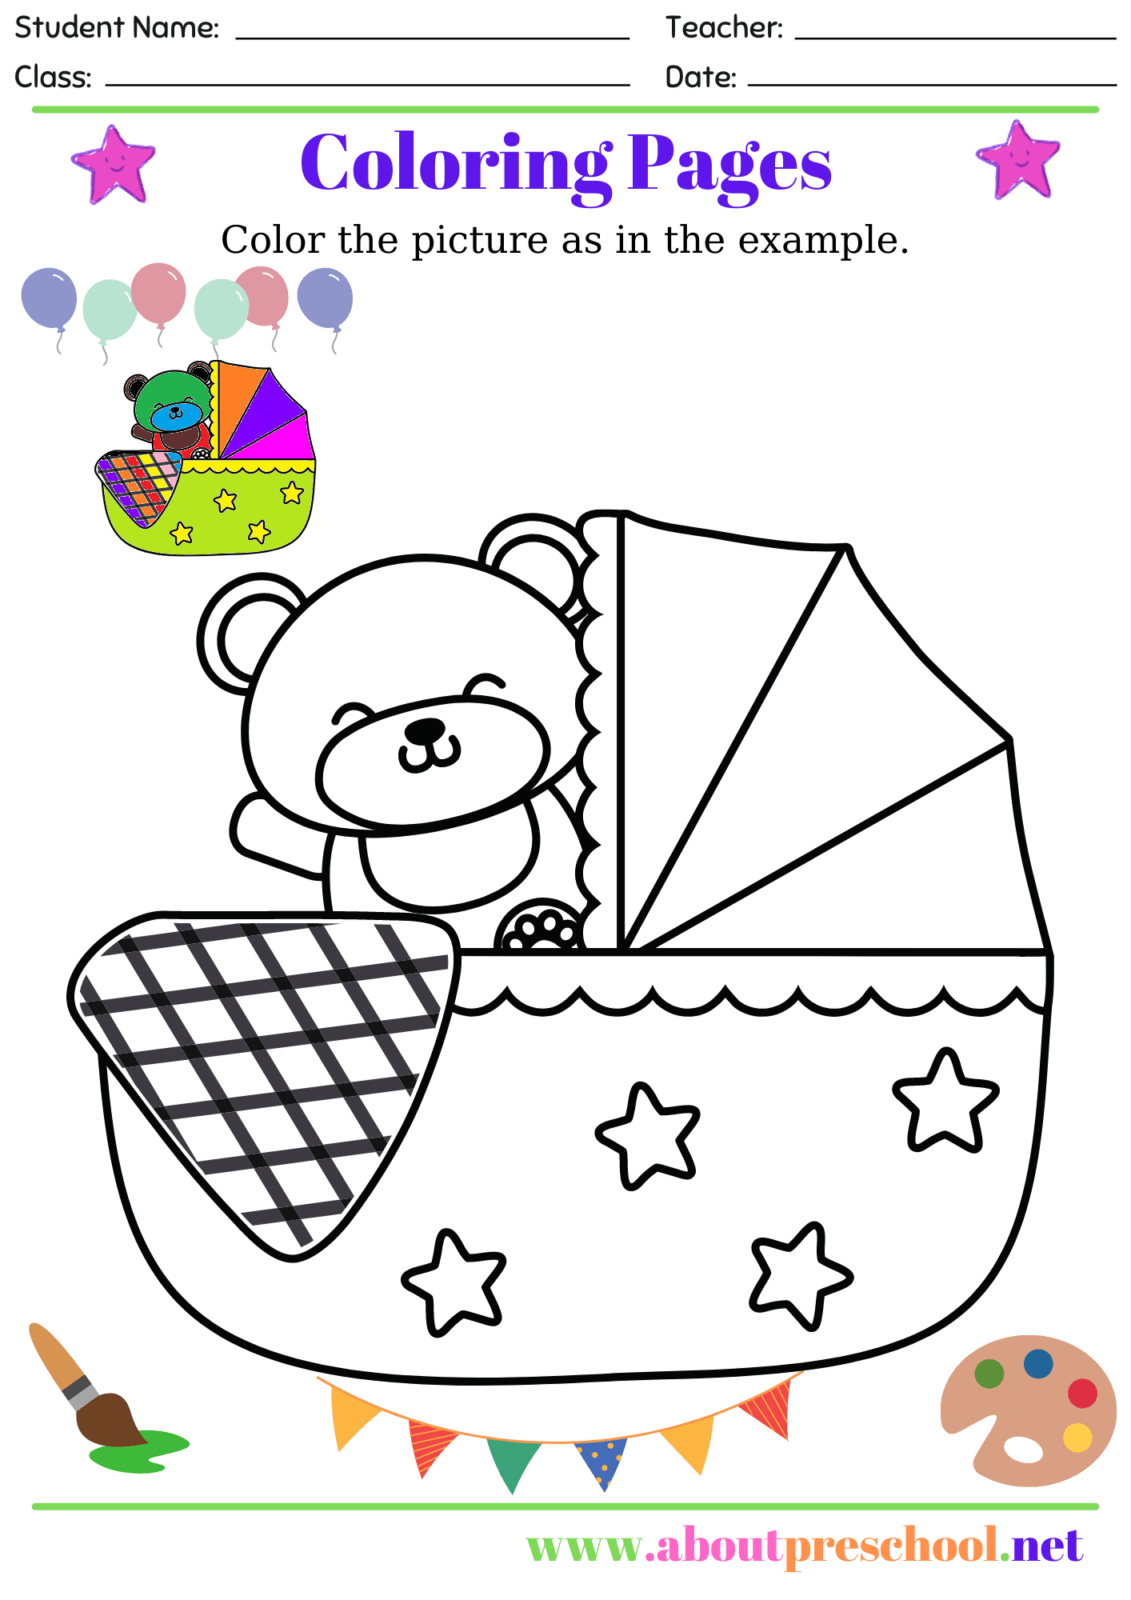 Coloring Pages 10